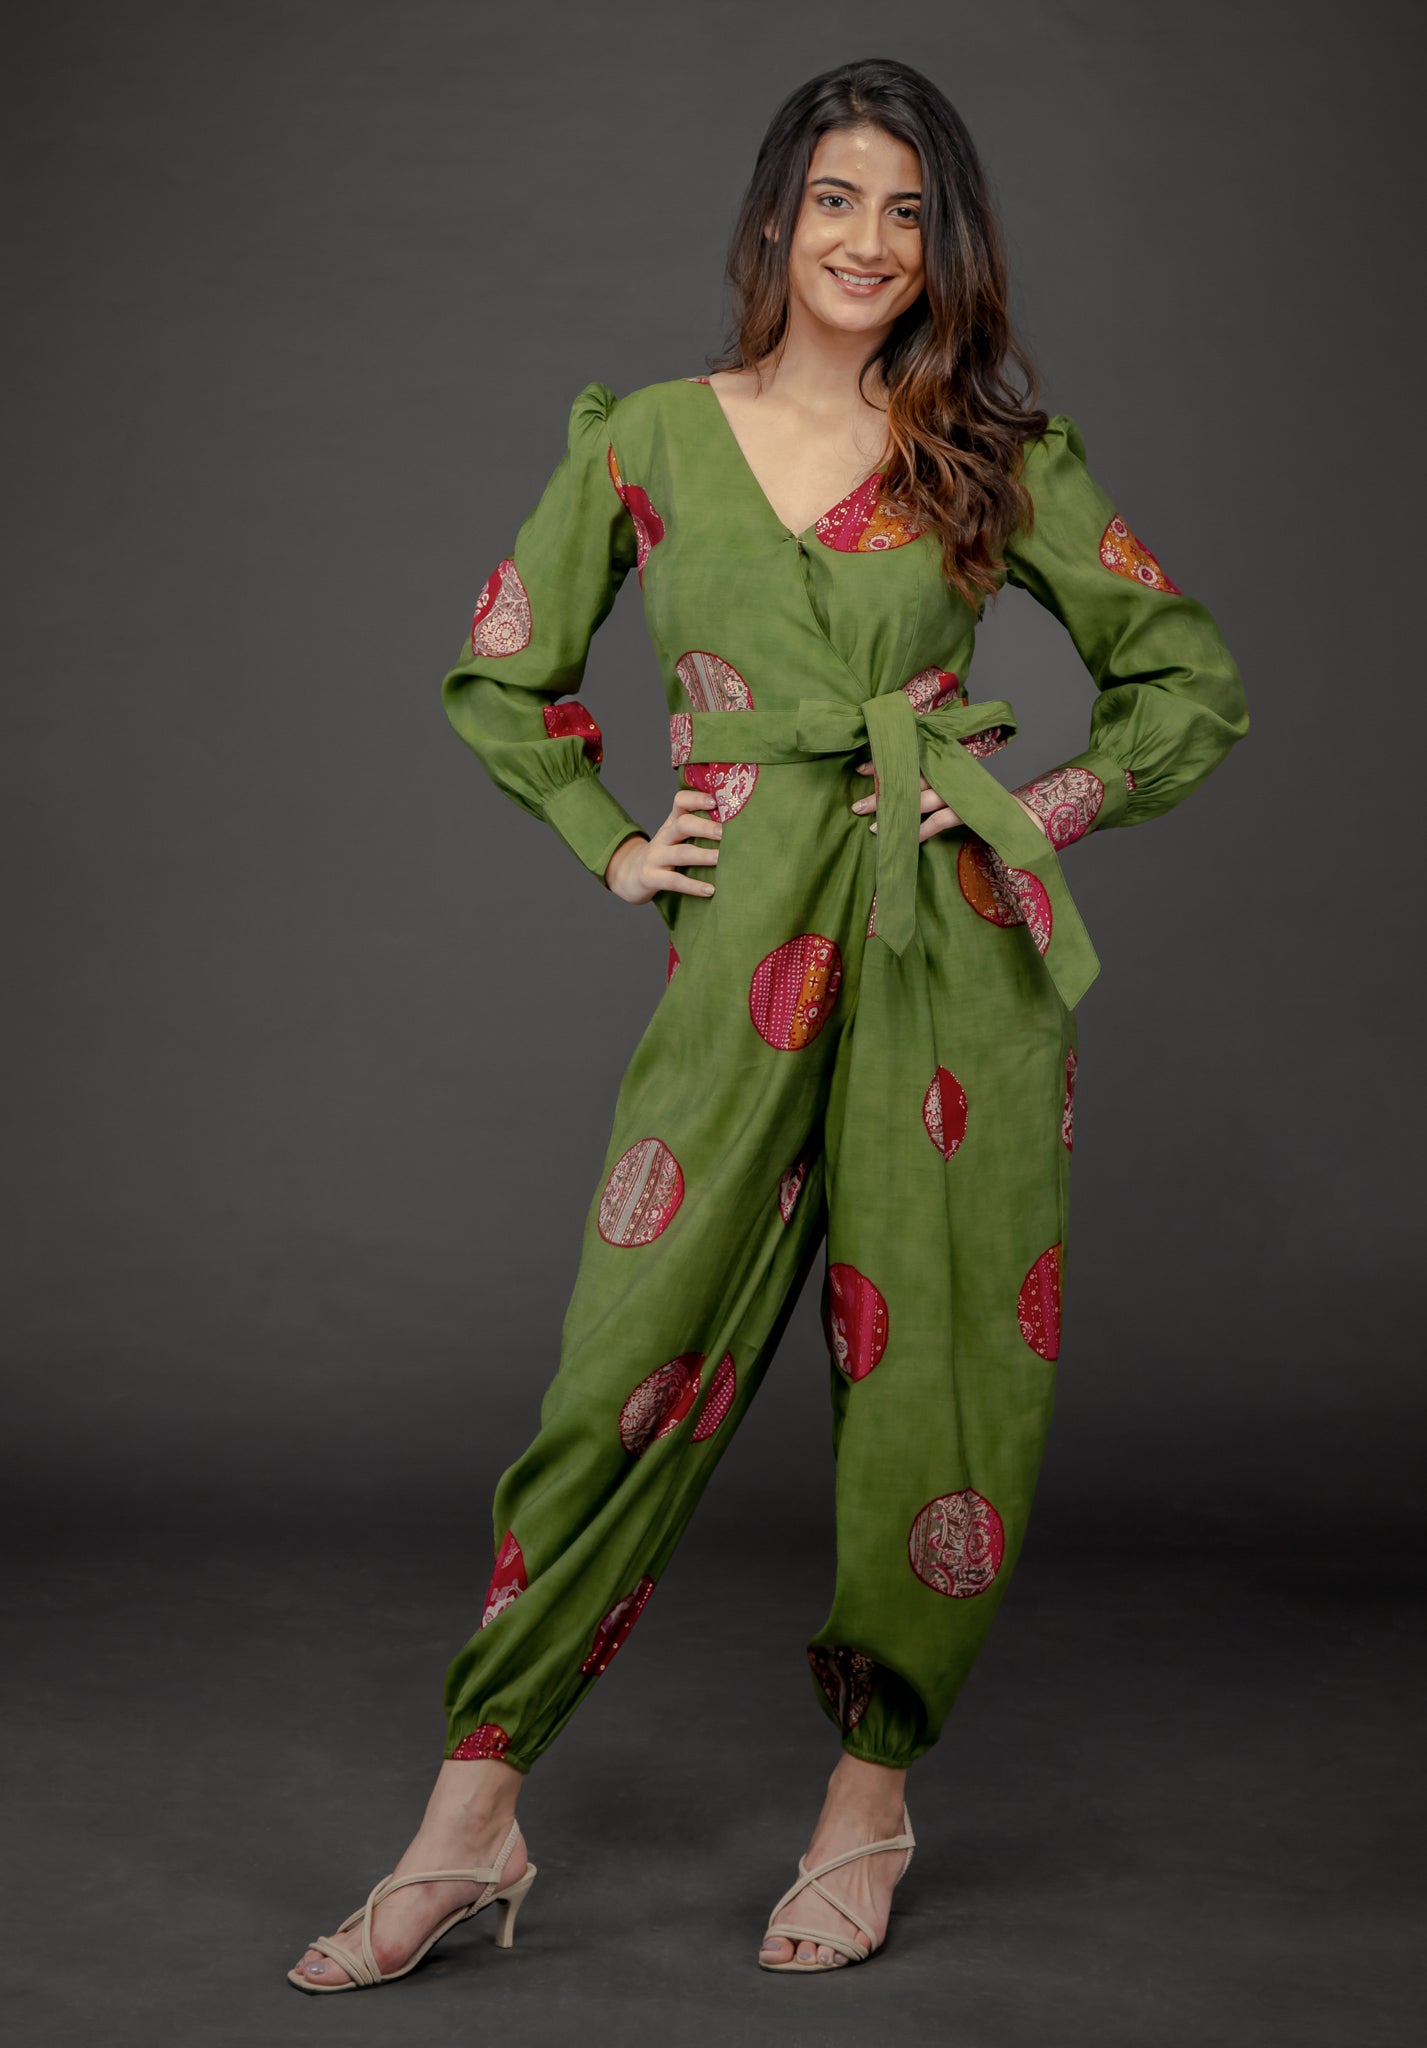 GREEN GOLD FOIL OVERLAY JUMPSUIT WITH CUFFED SLEEVE